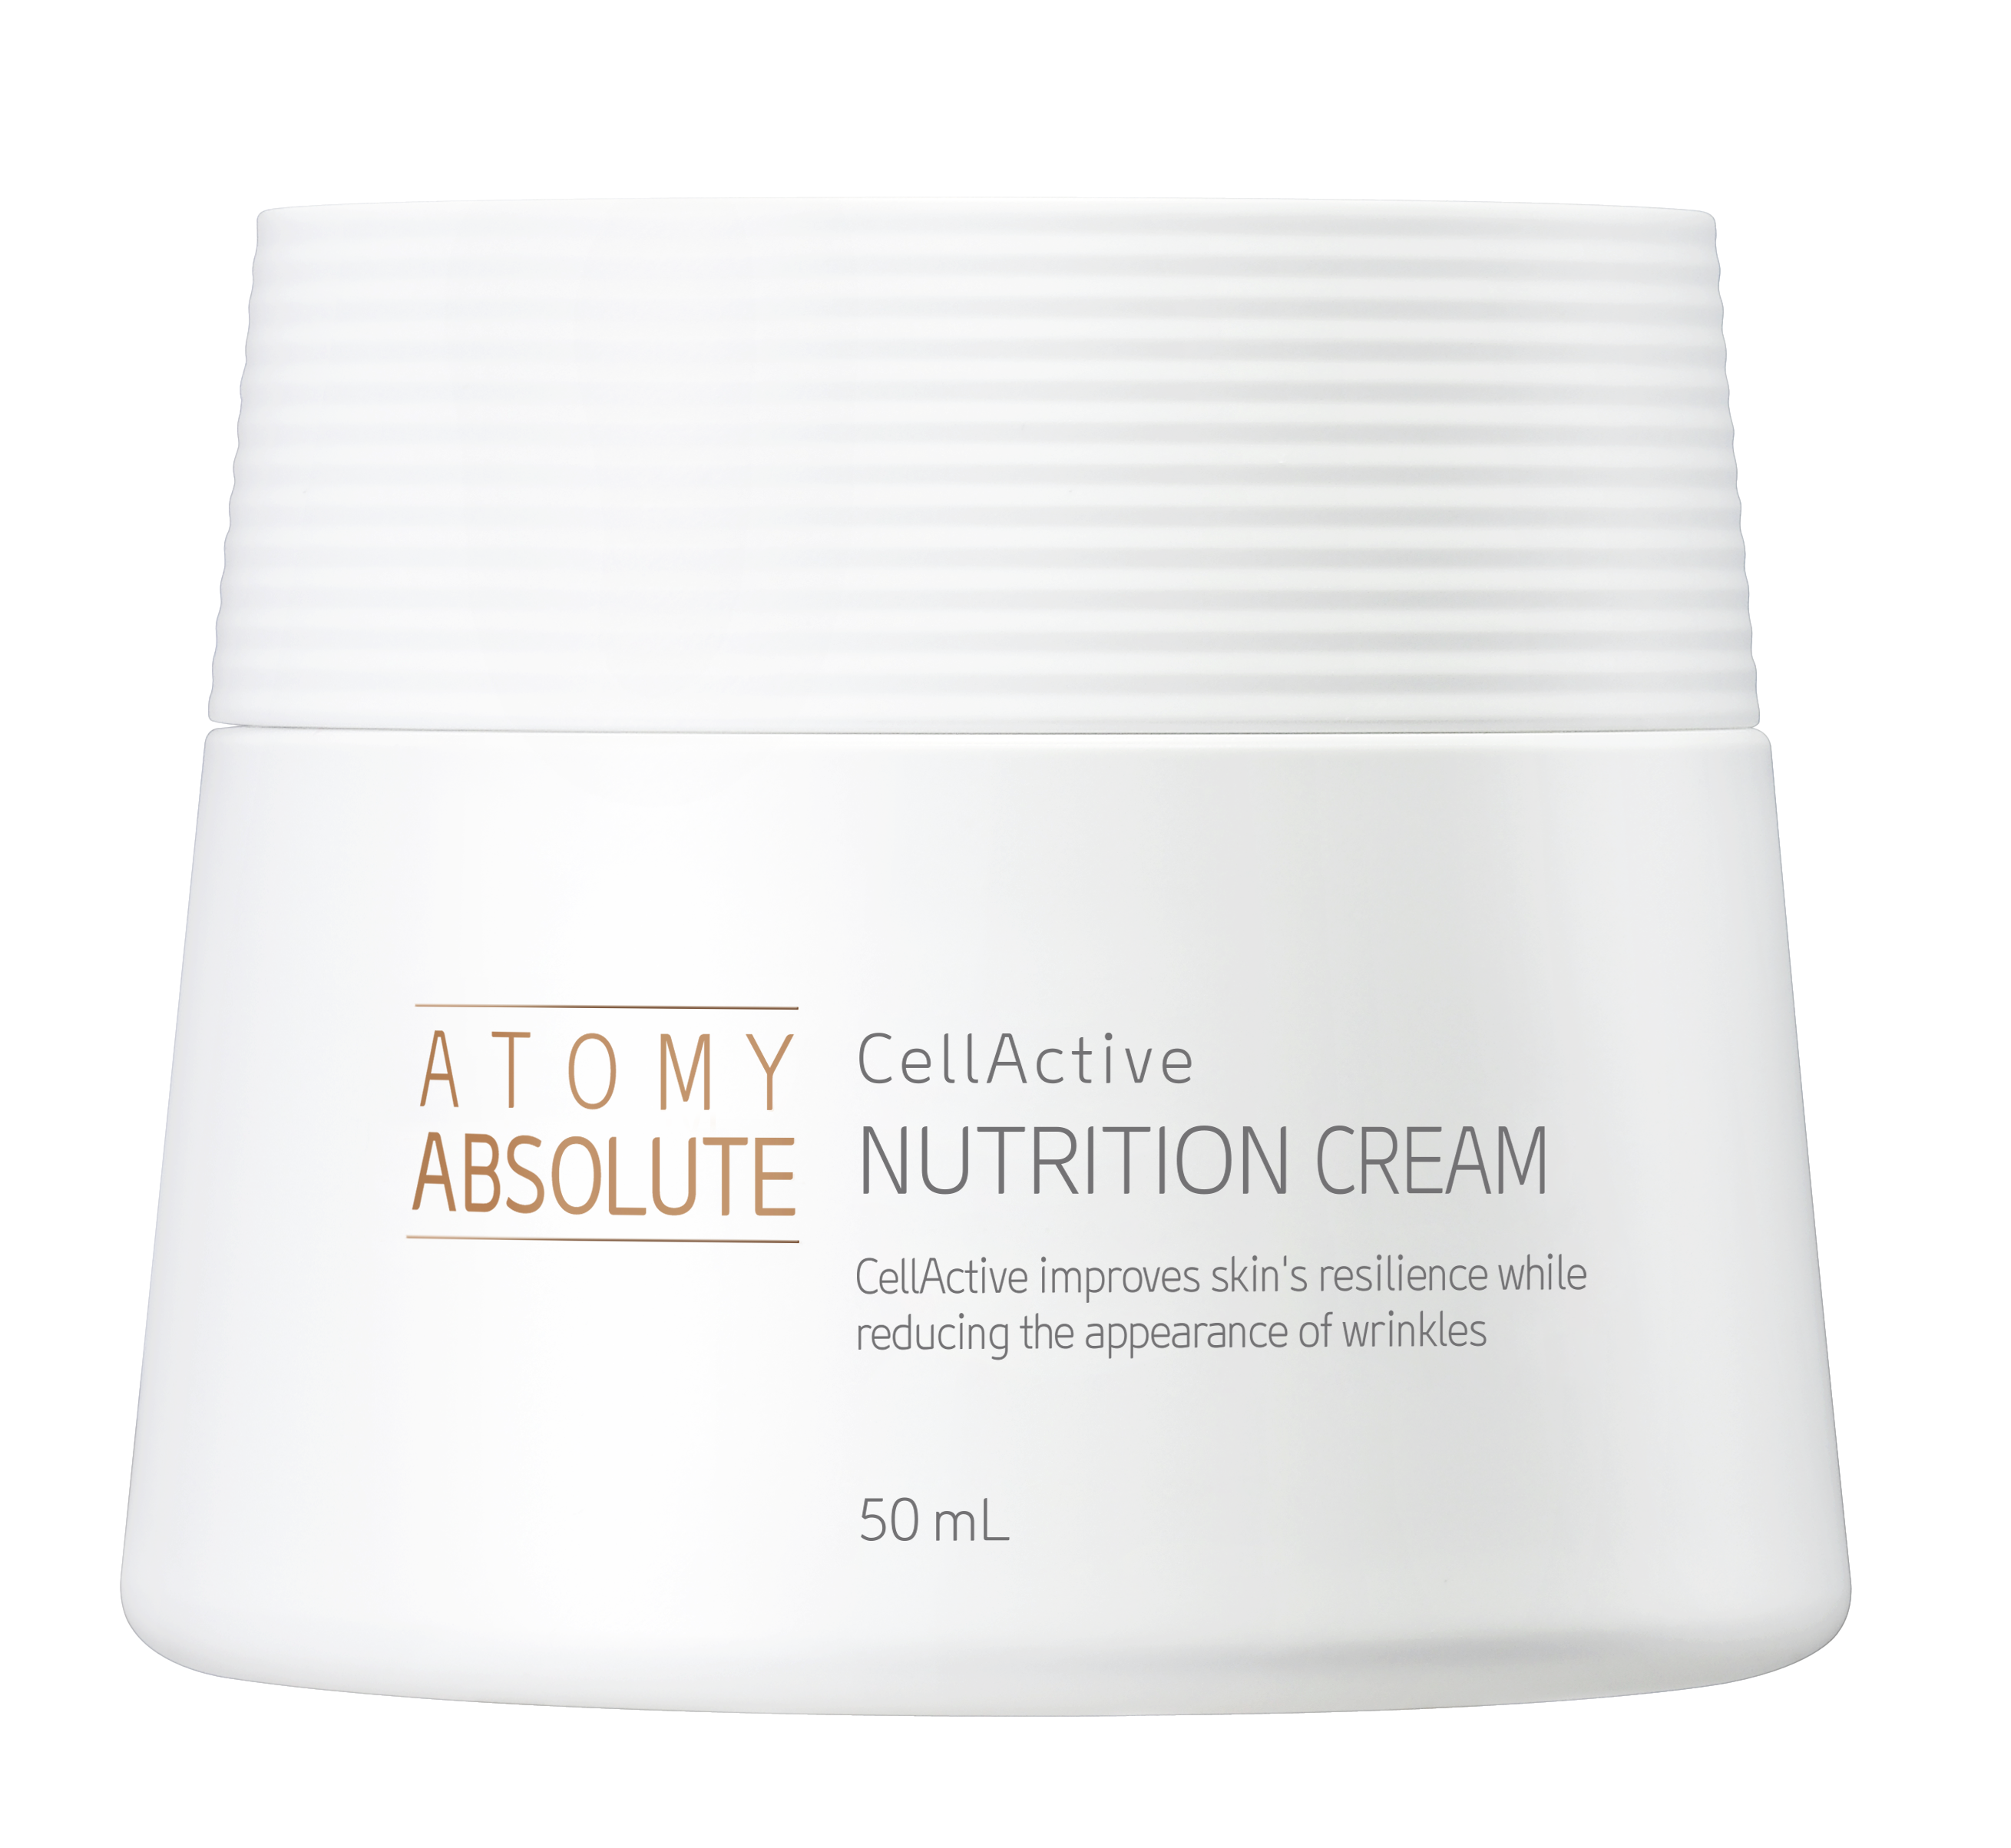 Absolute Nutrition Cream | Atomy India